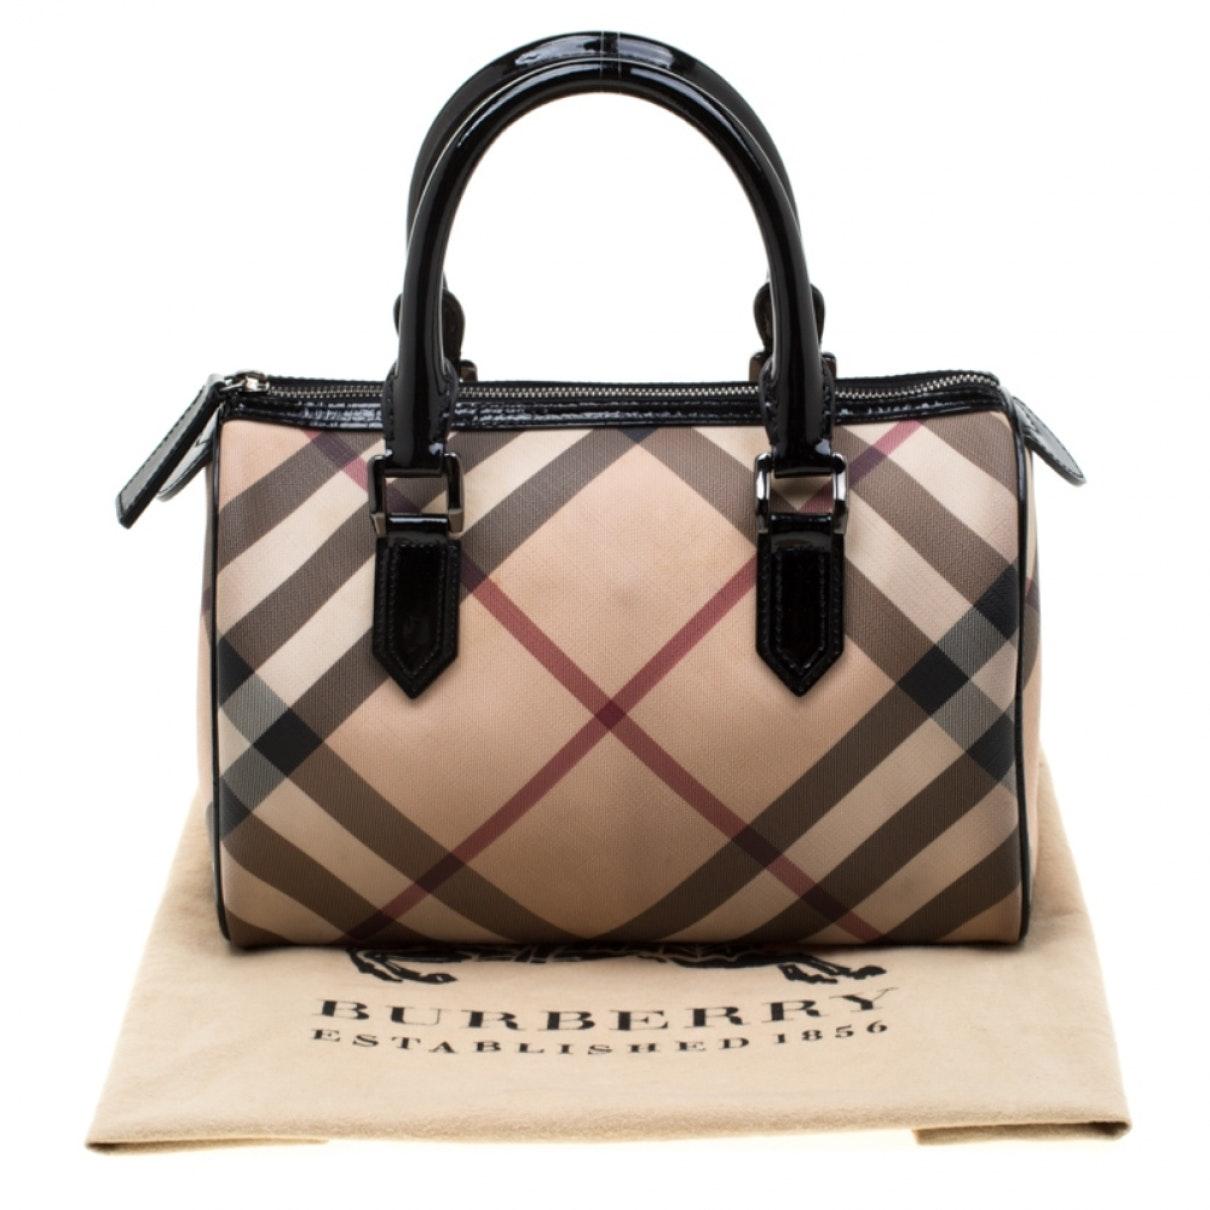 Burberry Beige Patent Leather Handbag in Natural - Lyst